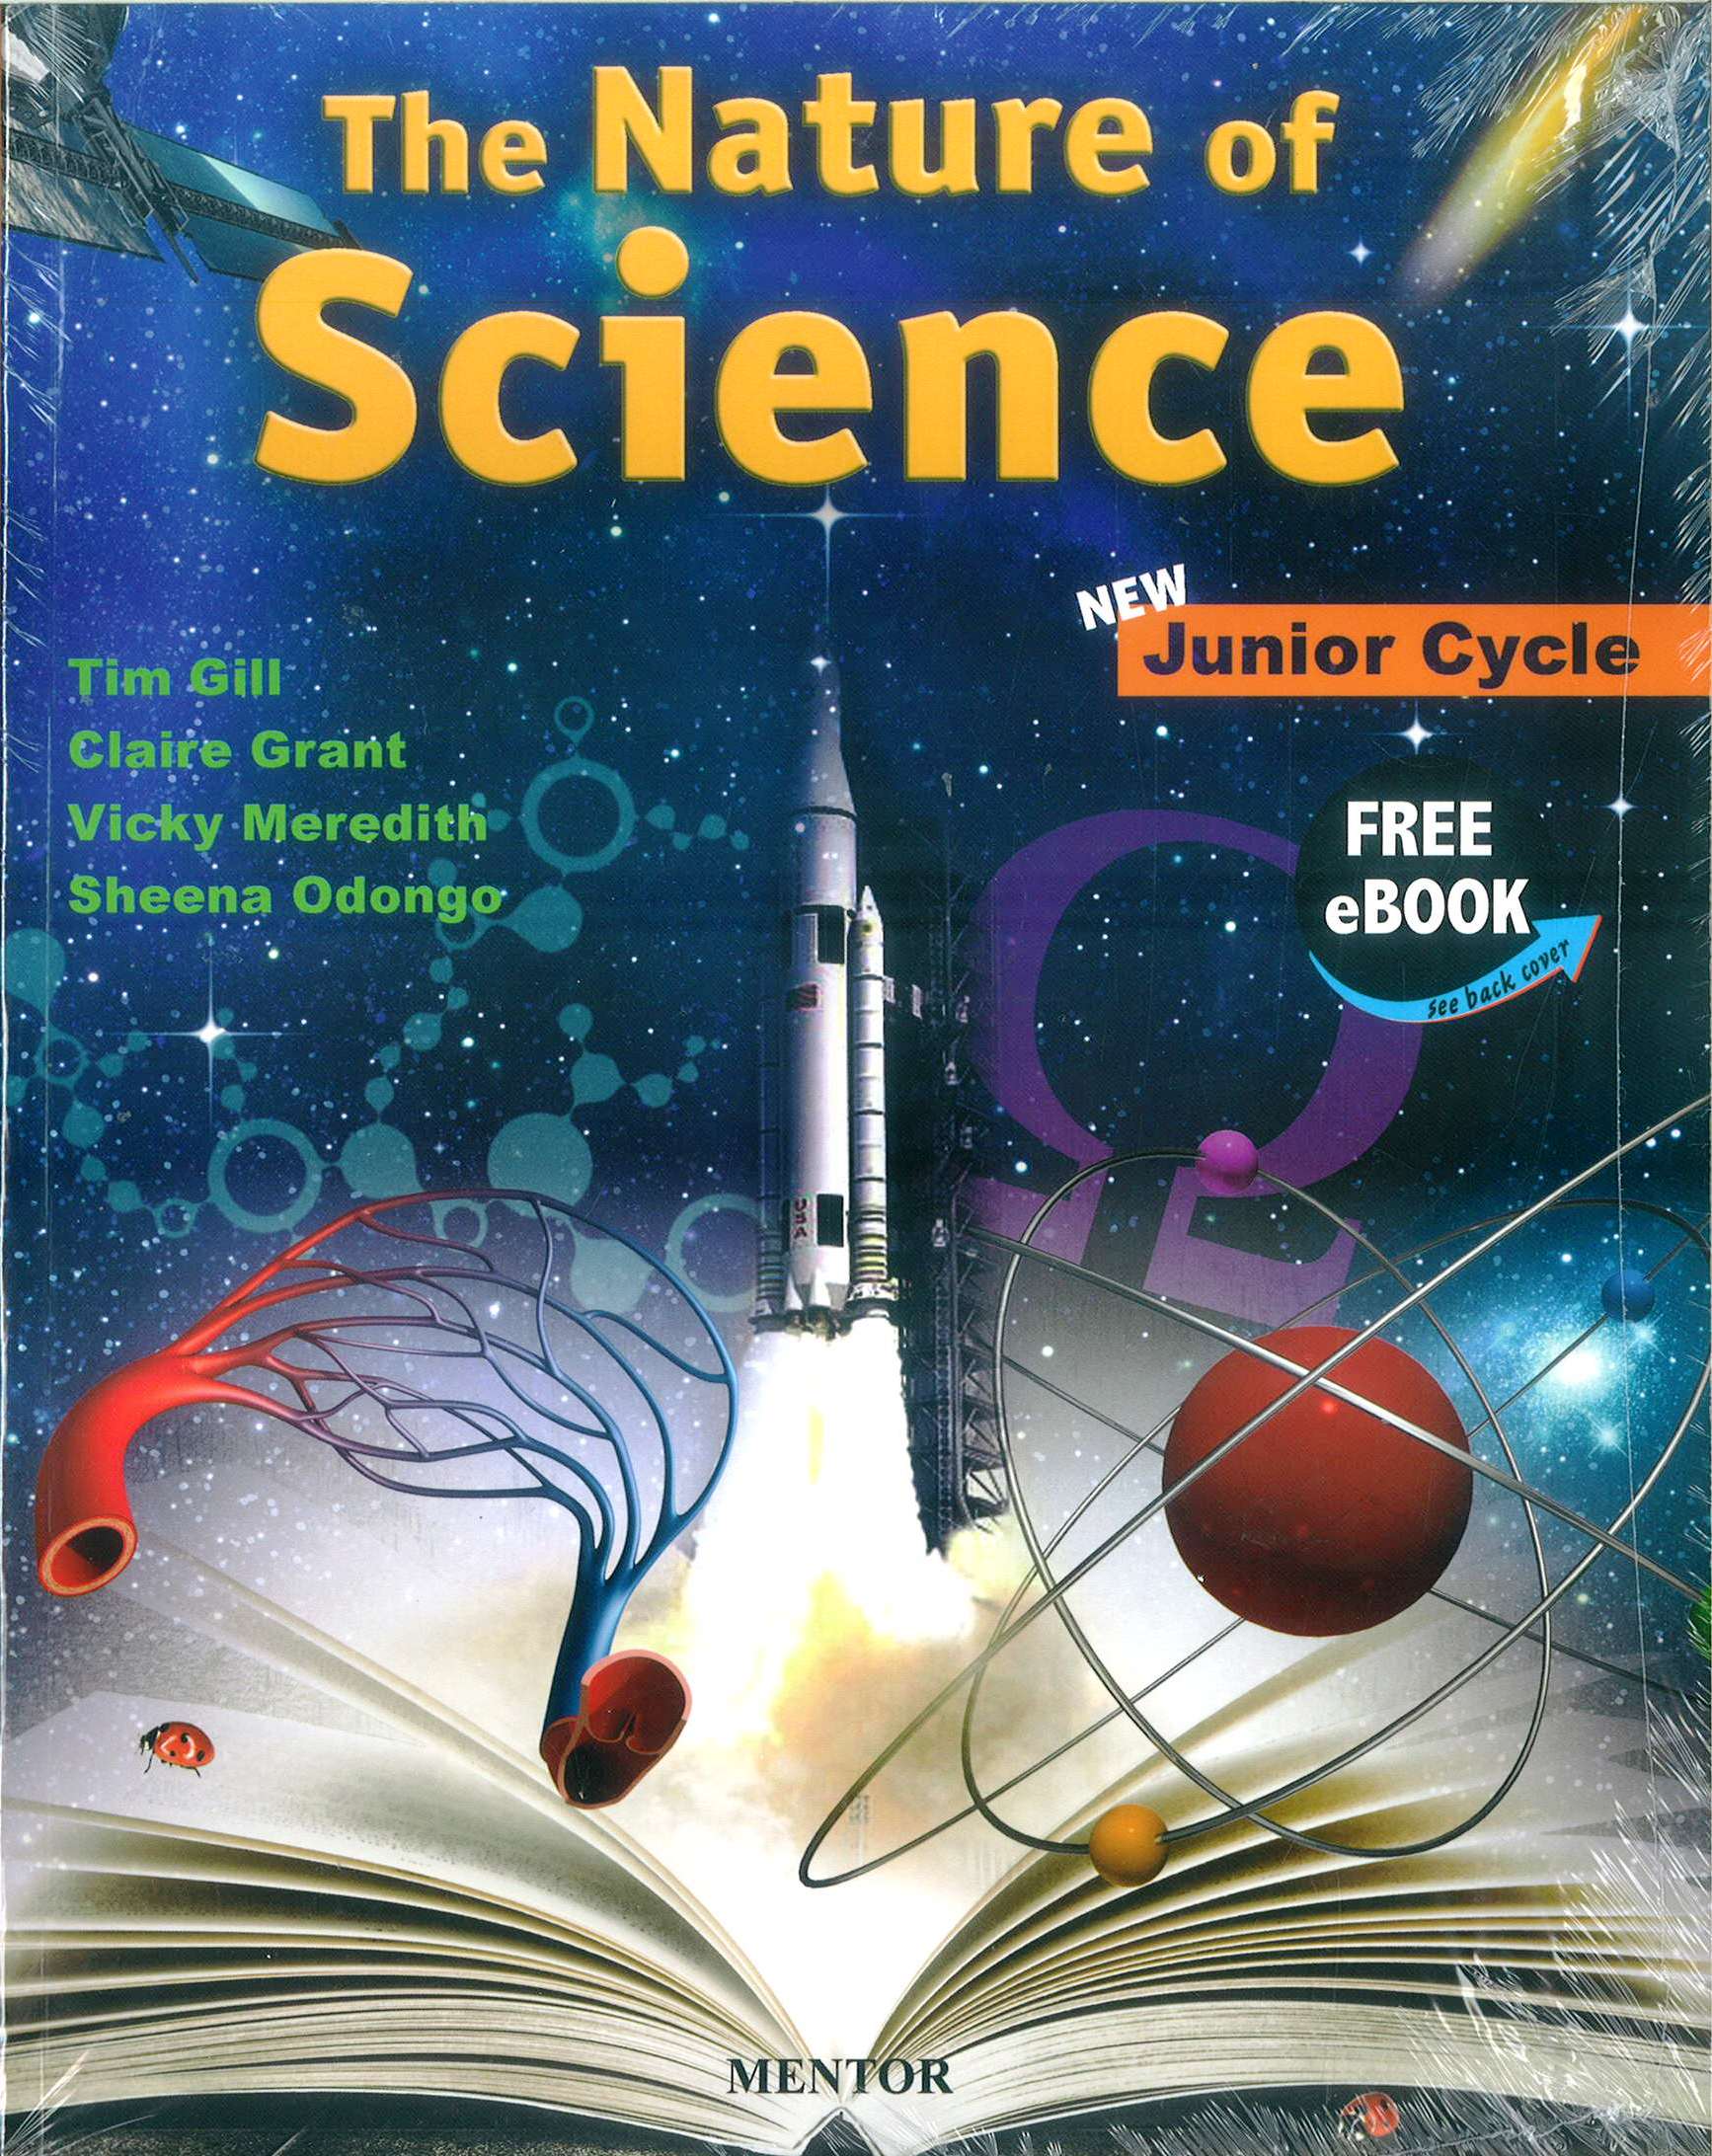 book review of science textbook ncert